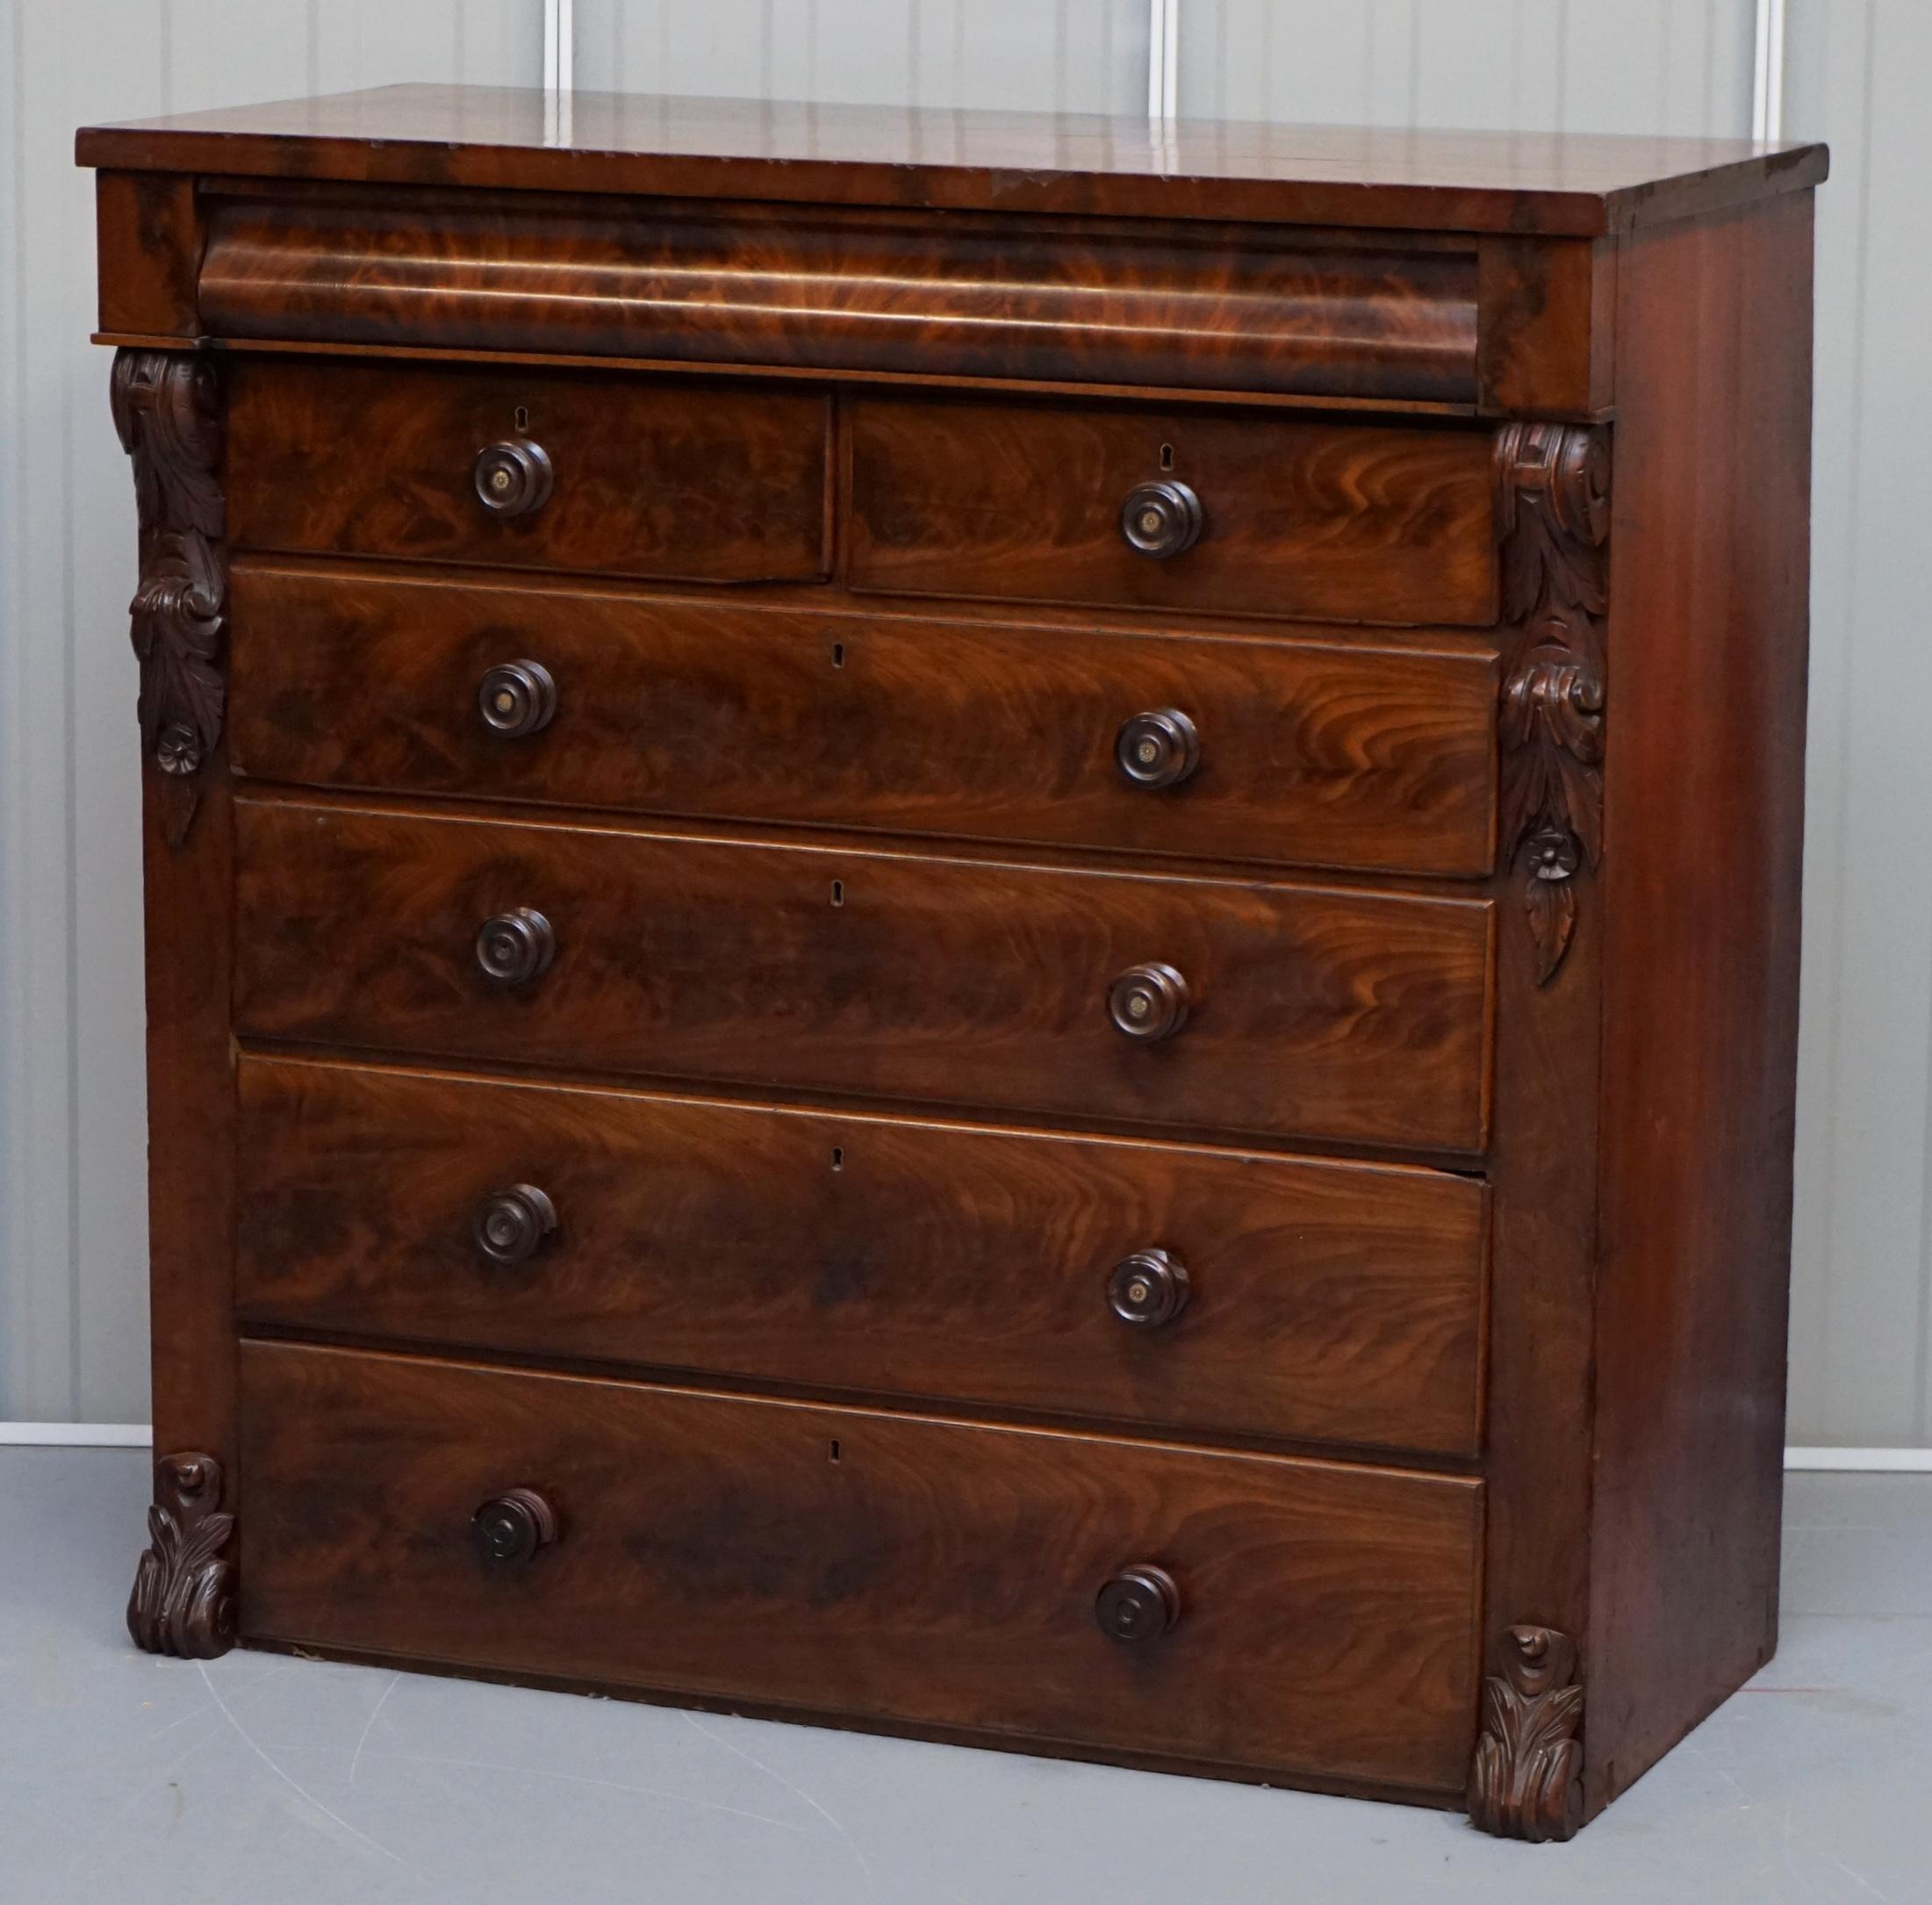 English Victorian Flamed Mahogany Chest of Drawers Large Substantial Storage Options